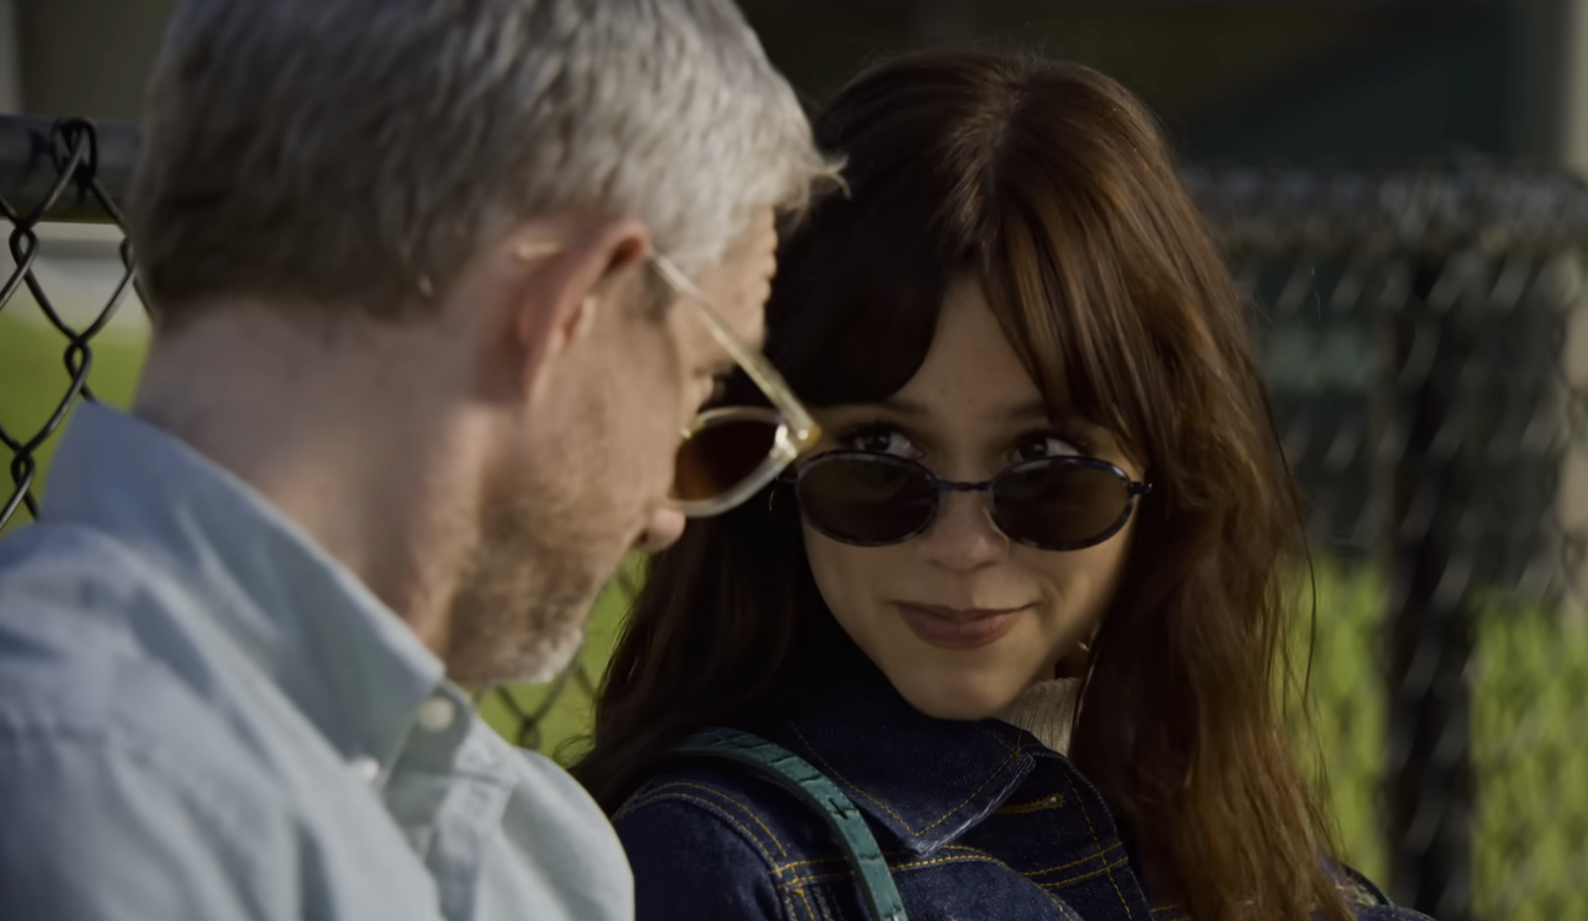 Jenna and Martin in casual wear sitting close looking over their sunglasses at each other